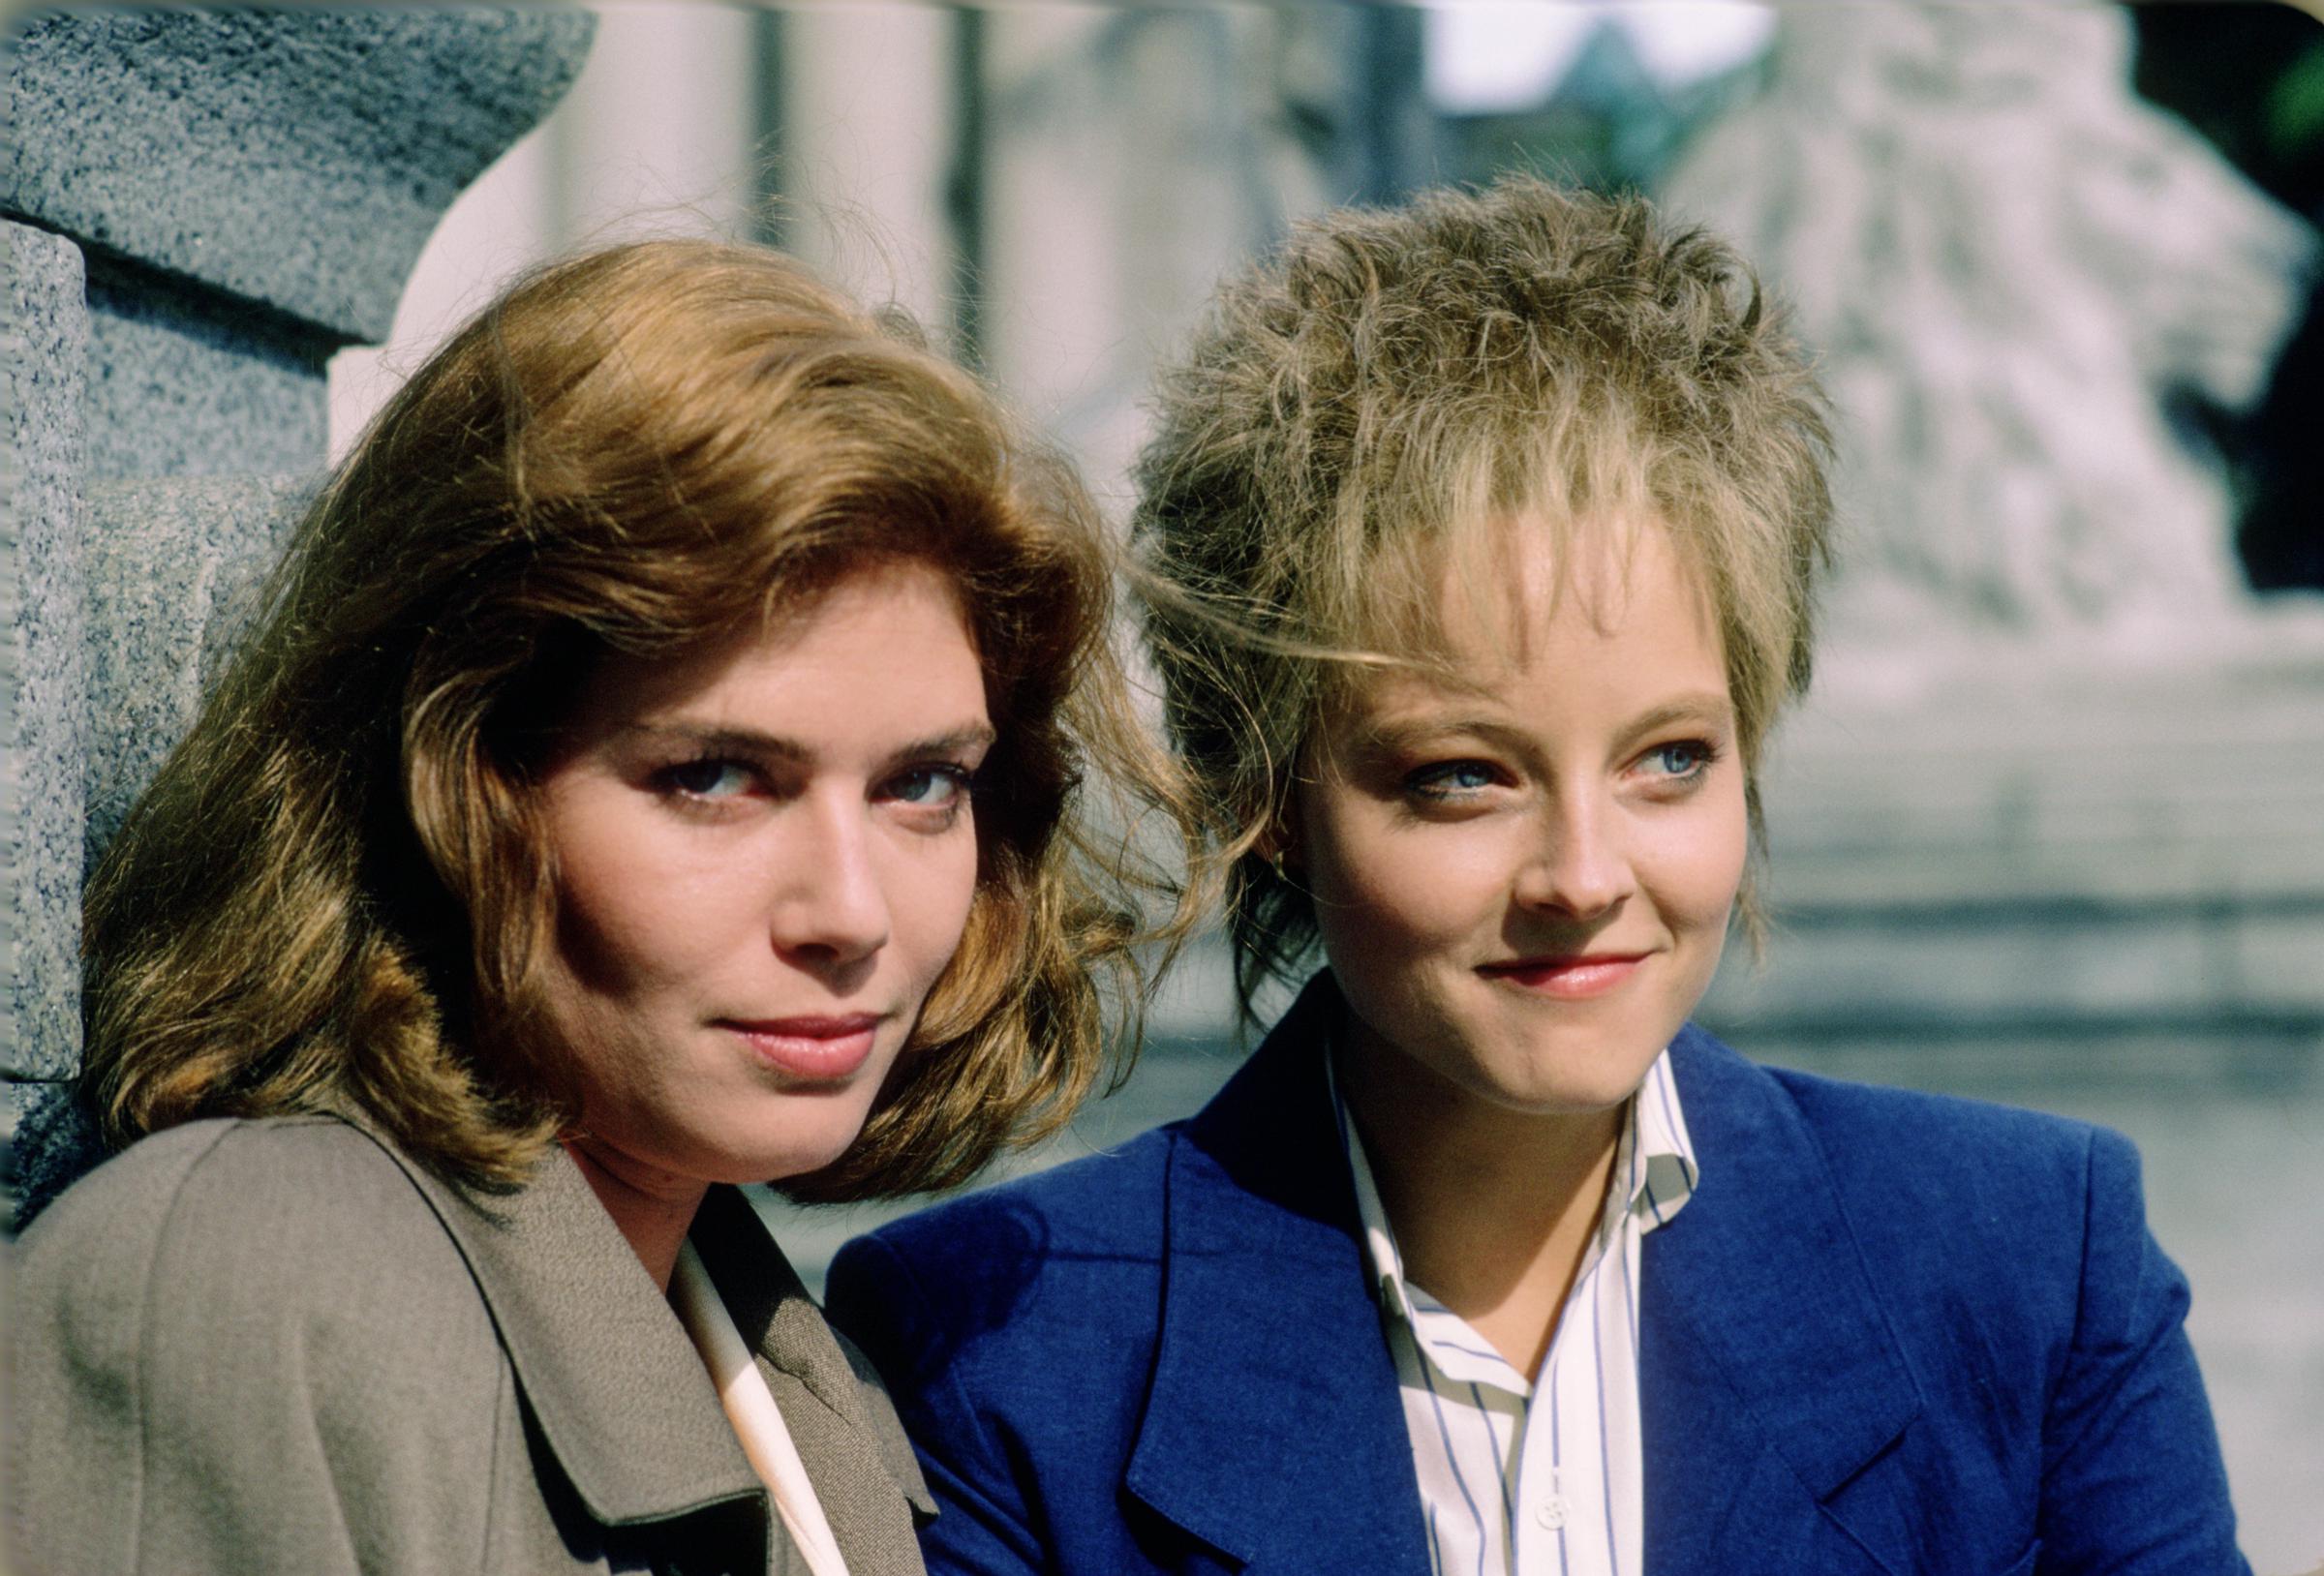 Kelly McGillis and Jodie Foster during a photoshoot promoting "The Accused" in June 1987 in Vancouver, Canada. | Source: Getty Images